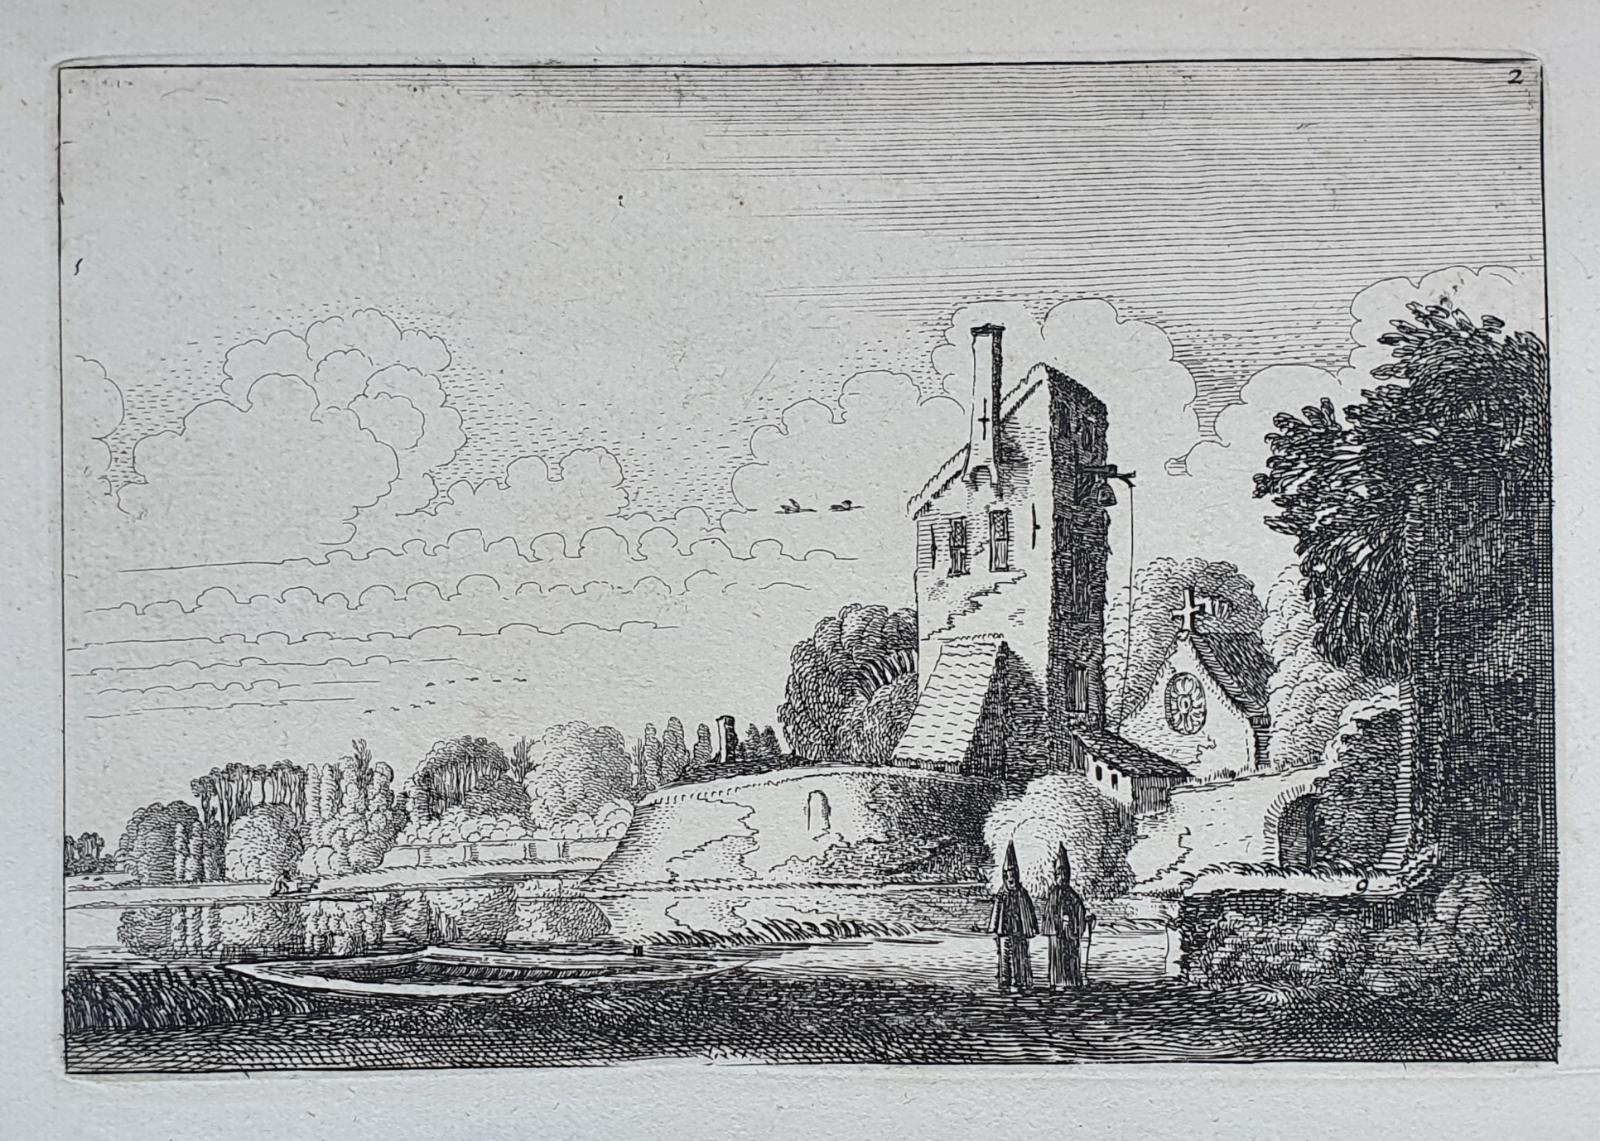 [Antique etching, ets, landscape print] J. v.d. Velde II, Landscape with fortress, a tower and a chapel, published before 1713.